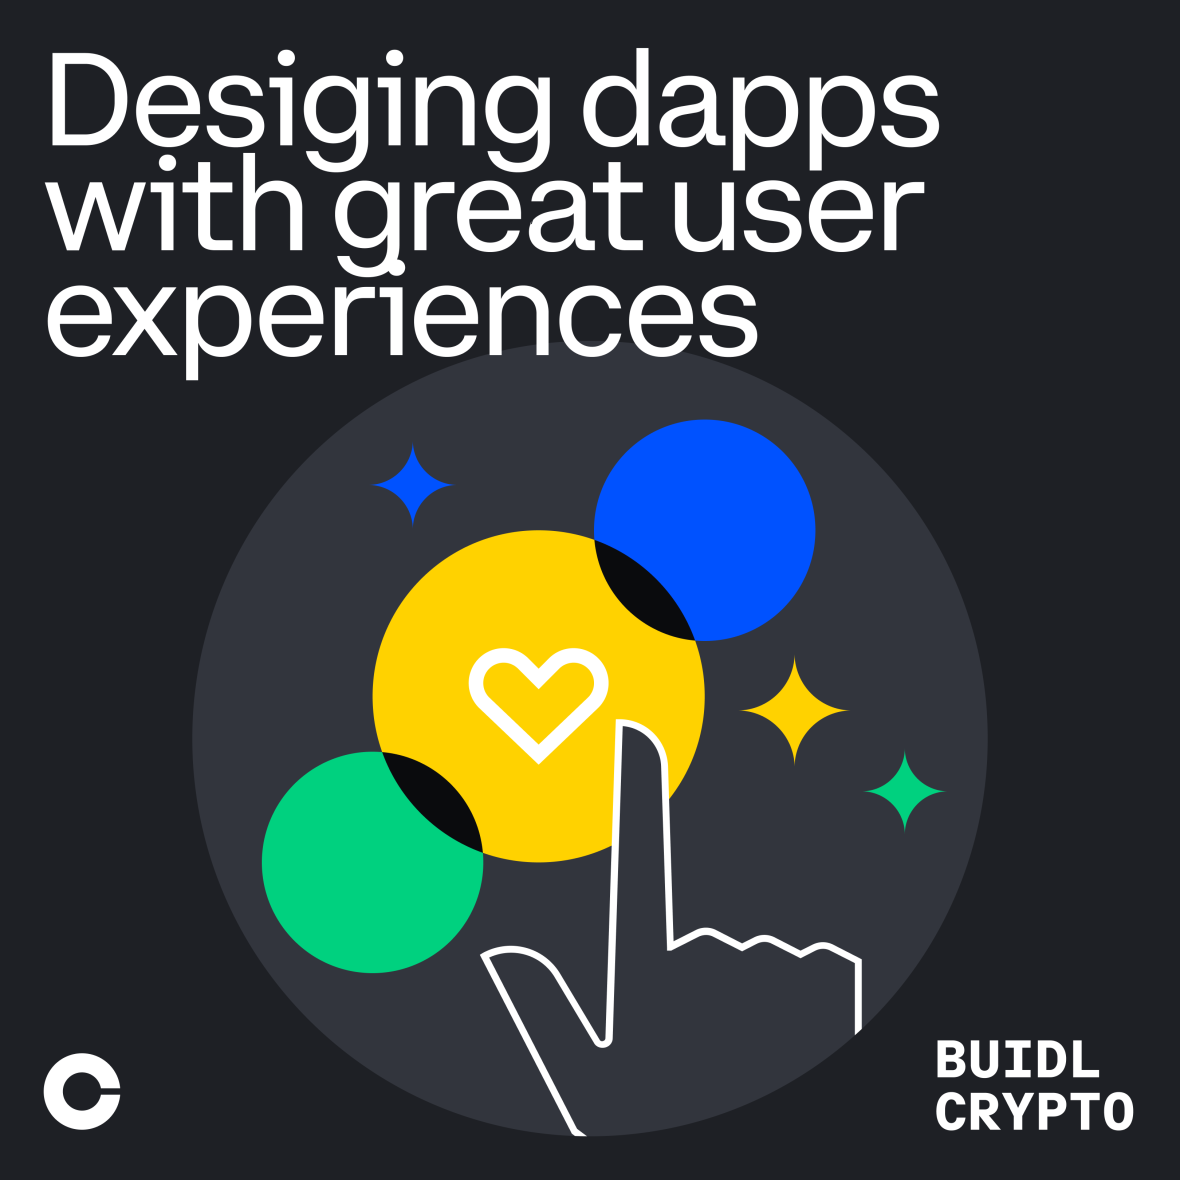 Designing dapps with great user experiences - Square.png